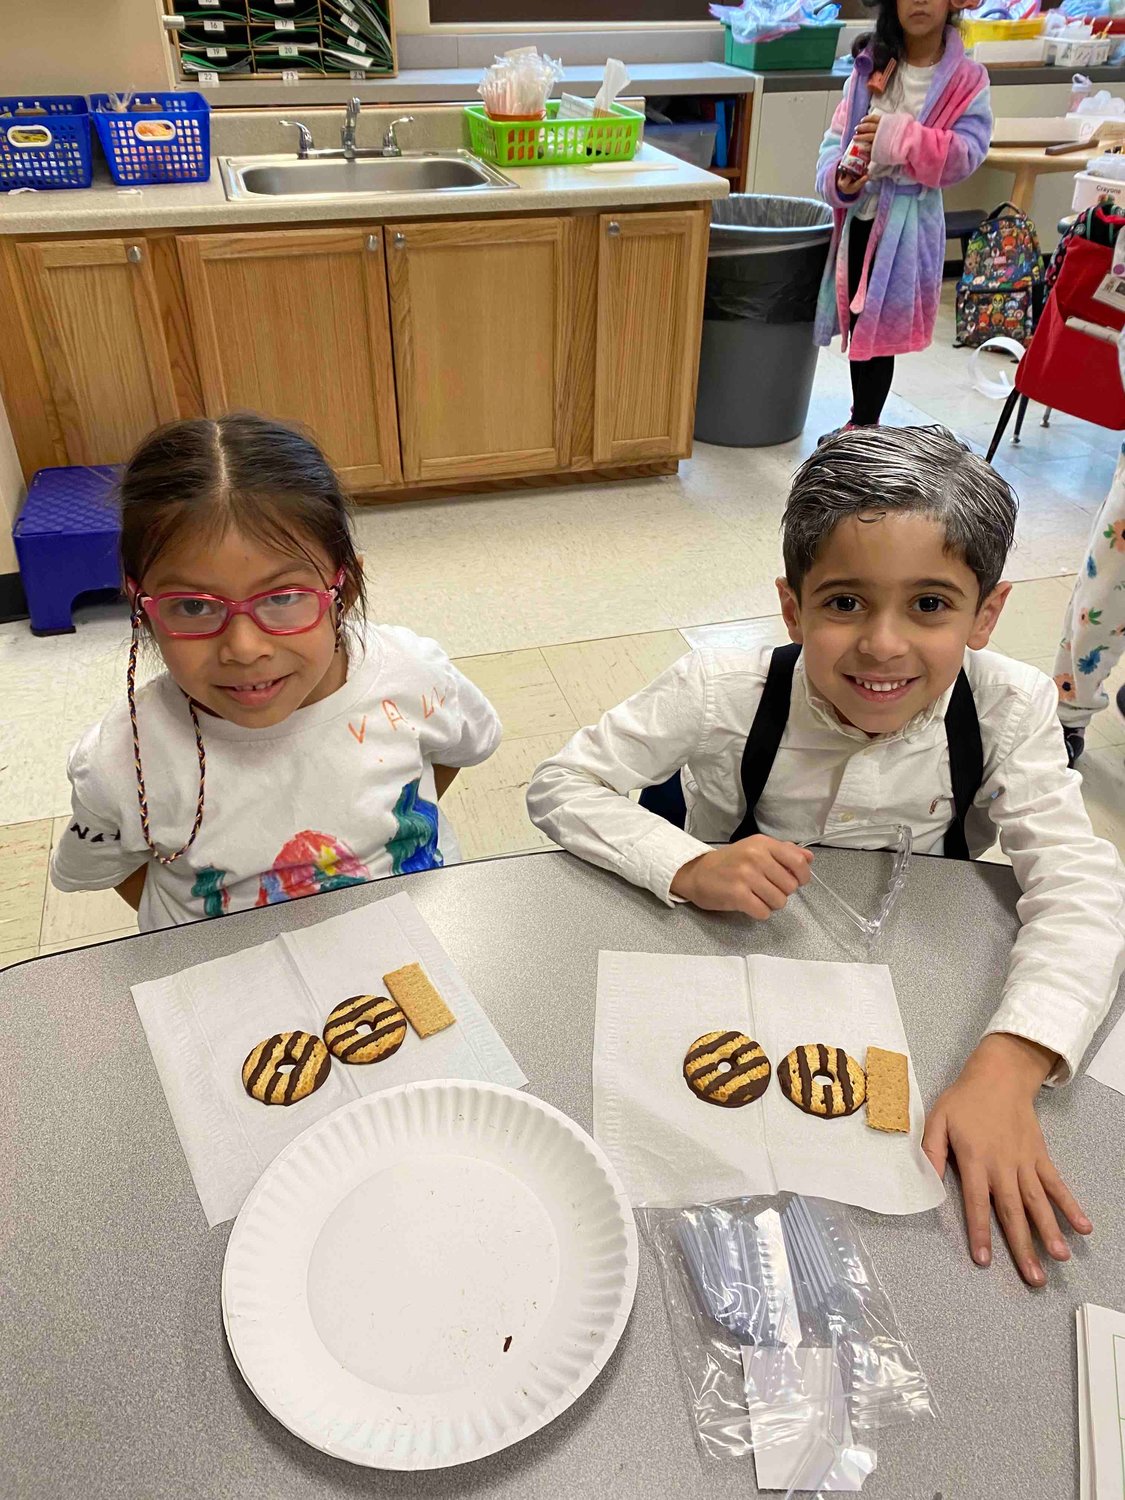 Nathalia Leiva and Devyn Vicioso, students at Columbus Avenue School participated in various activities centered around the number 100.